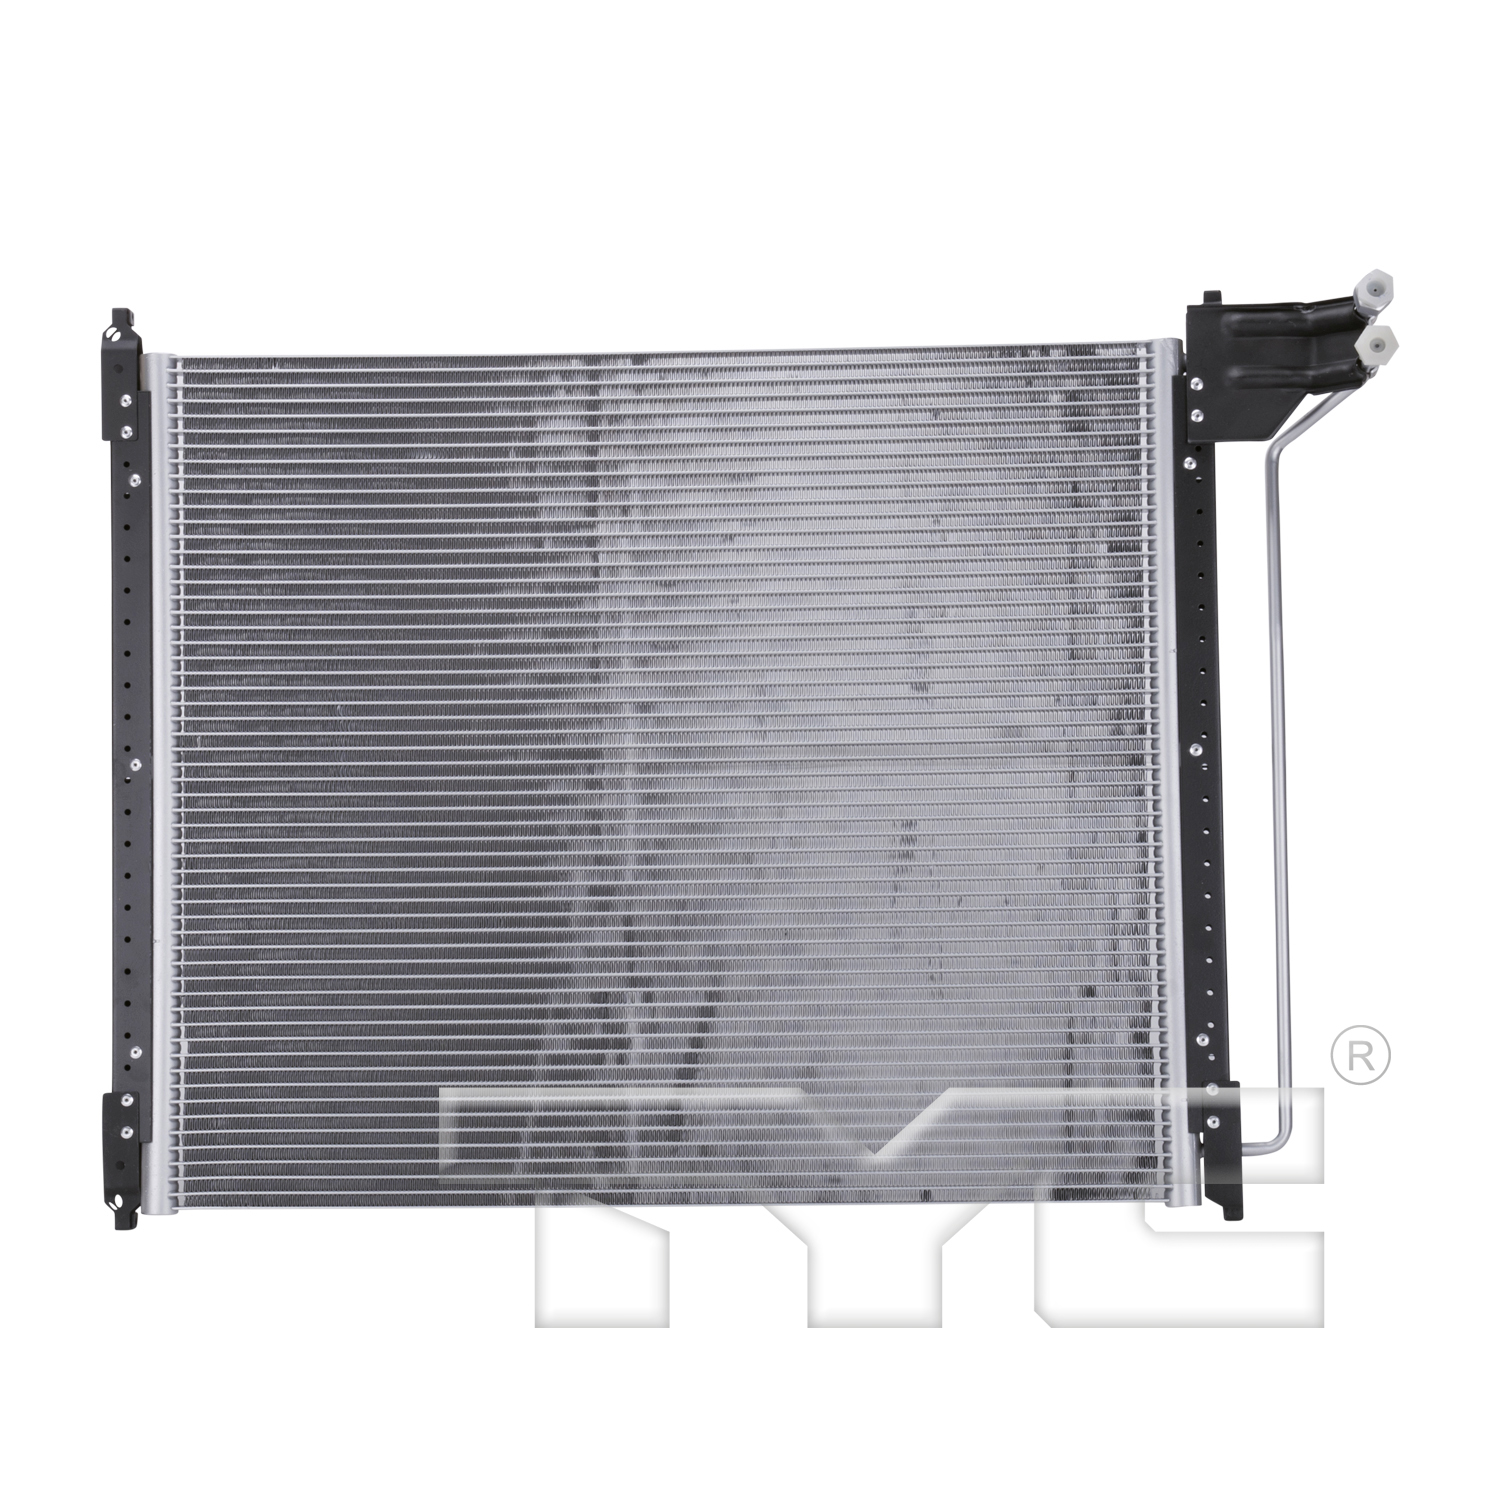 Aftermarket AC CONDENSERS for FORD - E-350 SUPER DUTY, E-350 SUPER DUTY,99-03,Air conditioning condenser